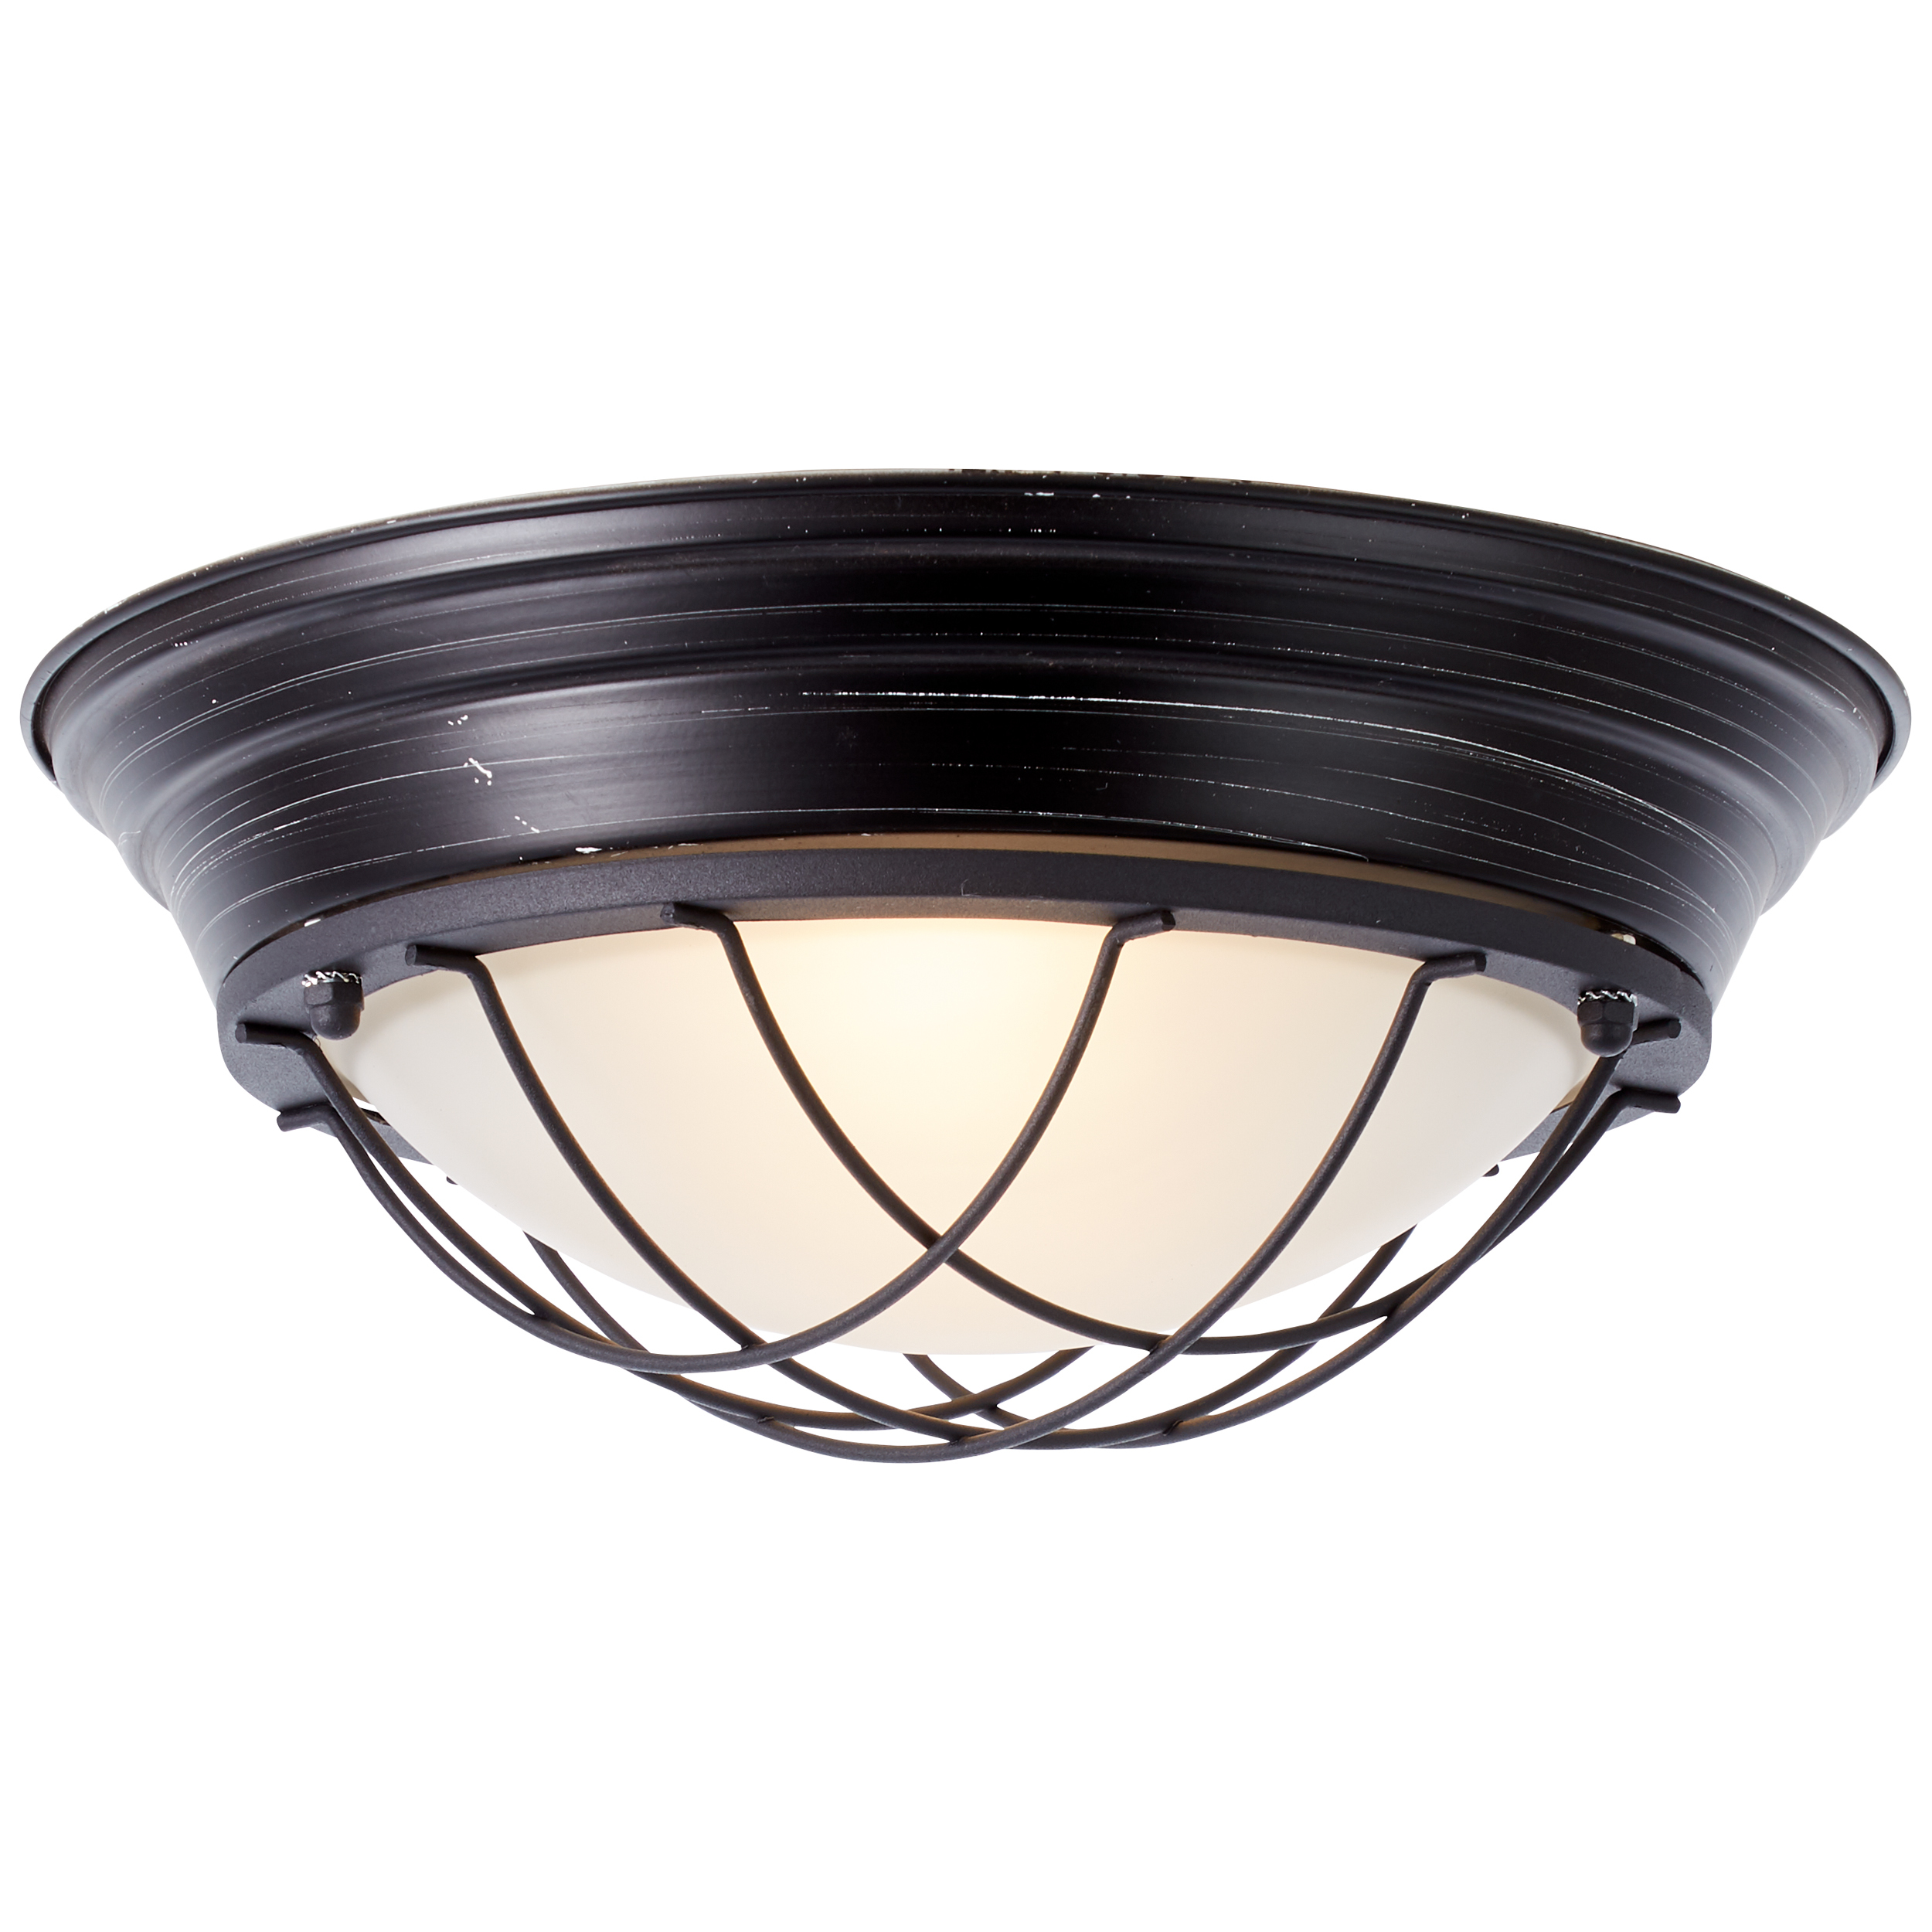 Typhoon Wall and Ceiling Light 34cm black antique